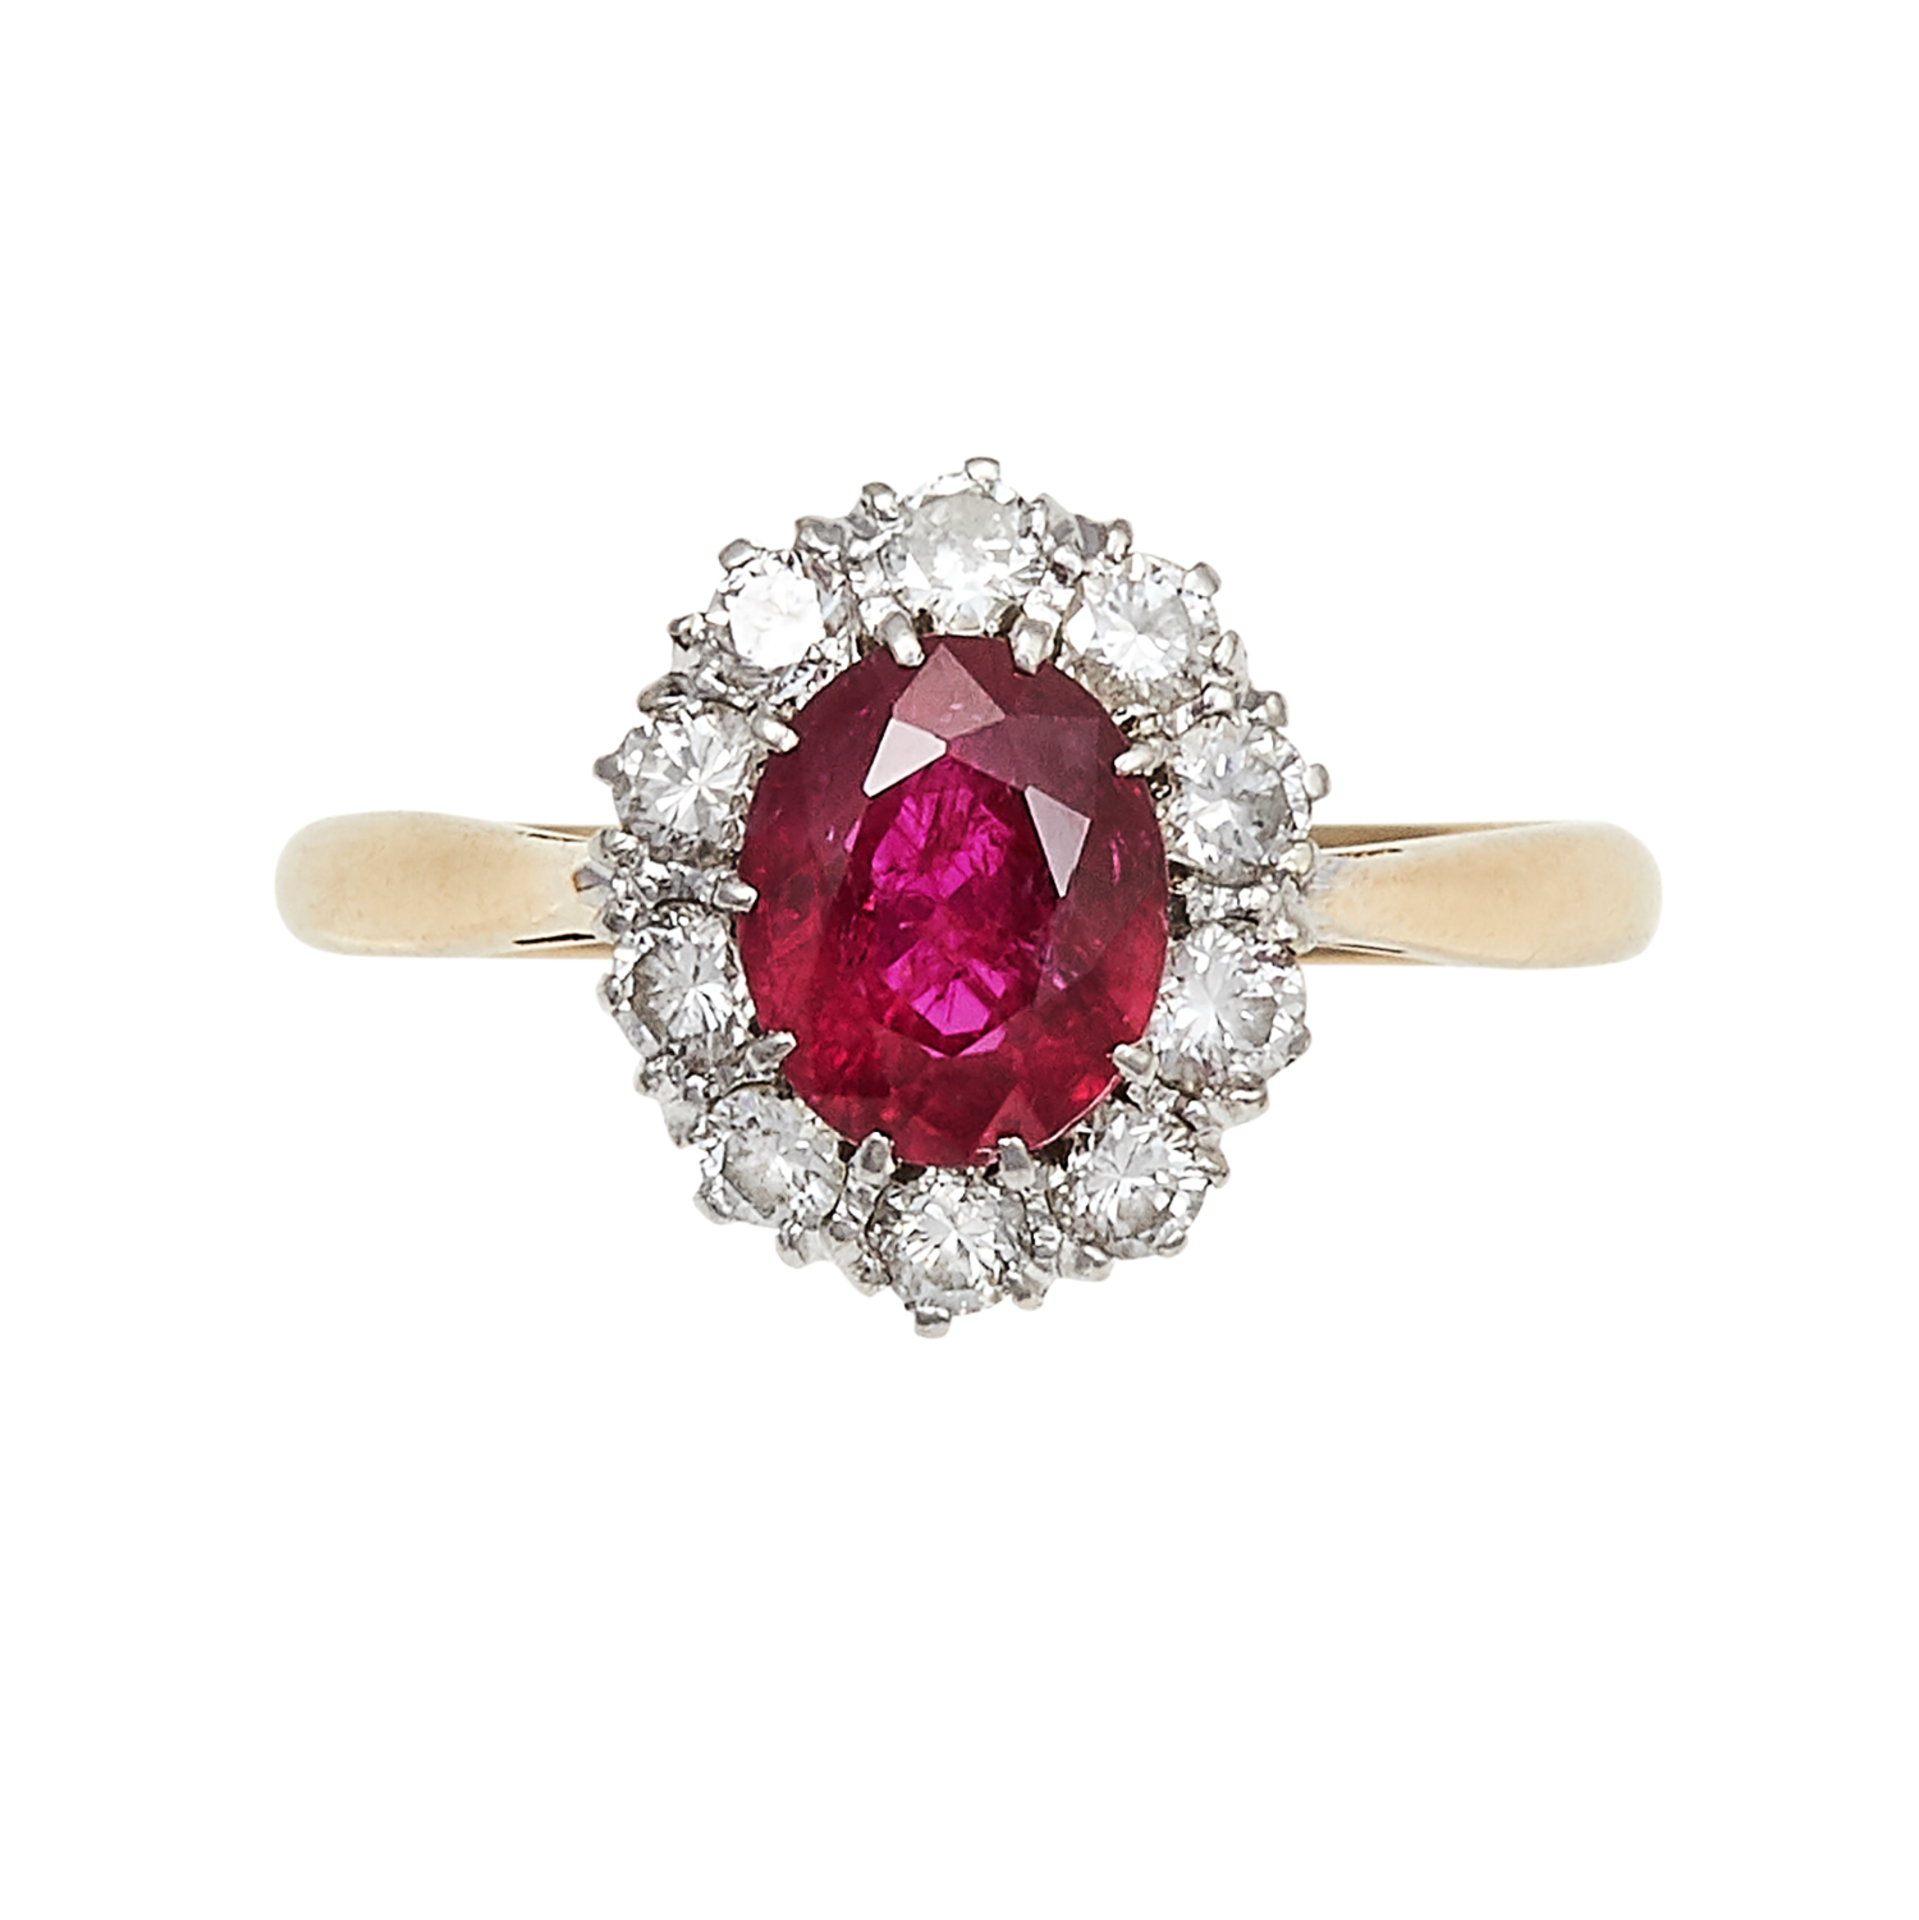 A RUBY AND DIAMOND RING in 18ct yellow gold and platinum, set with an oval cut ruby of 1.0 carats